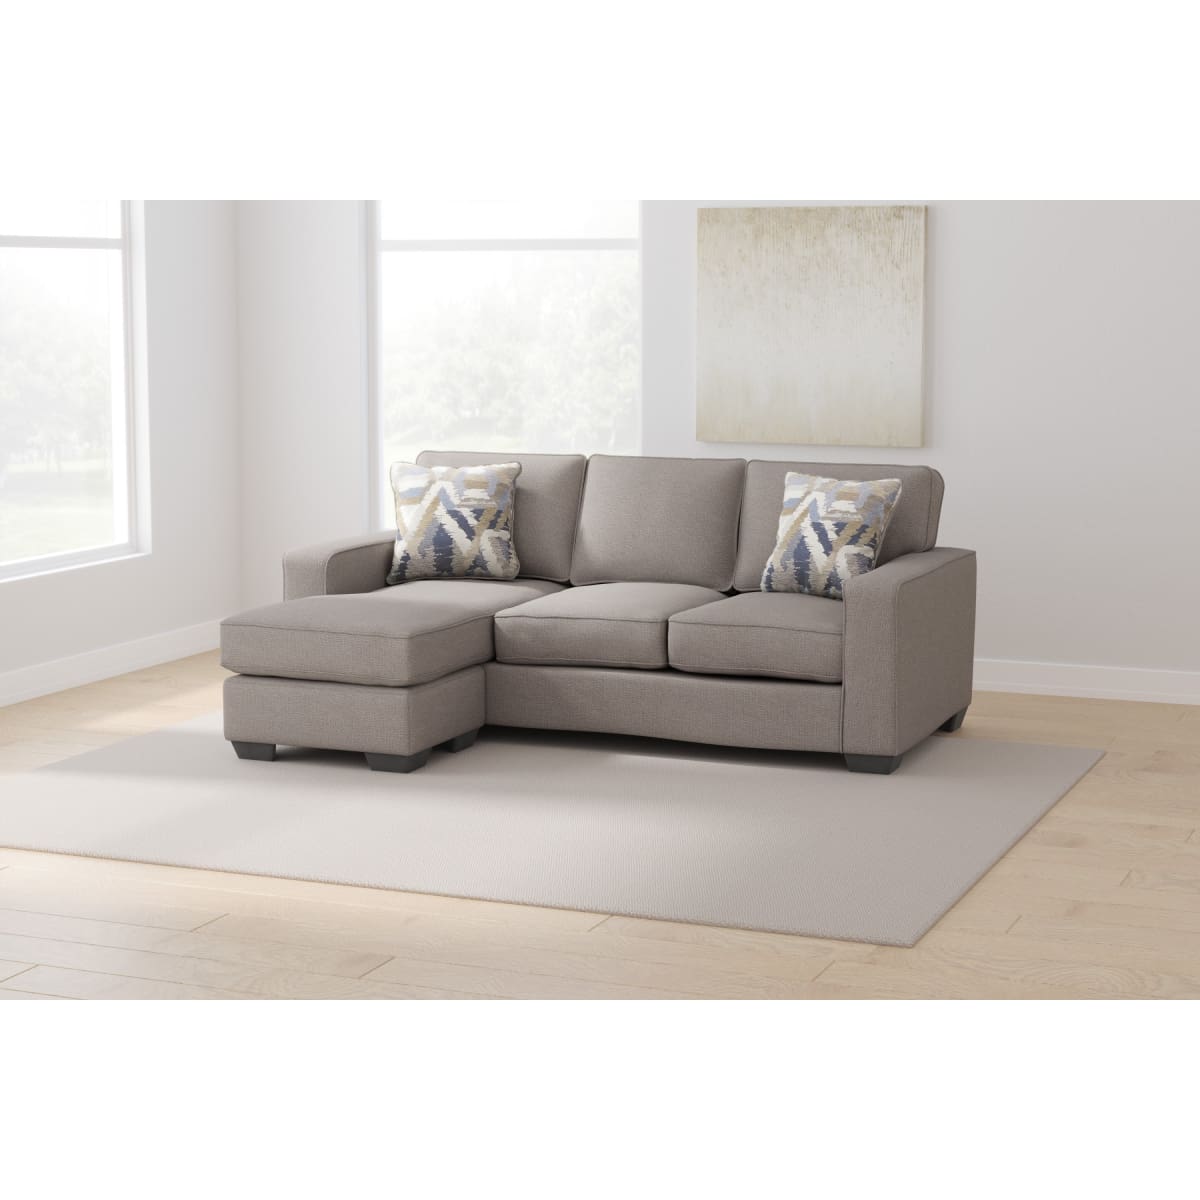 Greave Stone Sofa with Reversible Chaise - Sofa